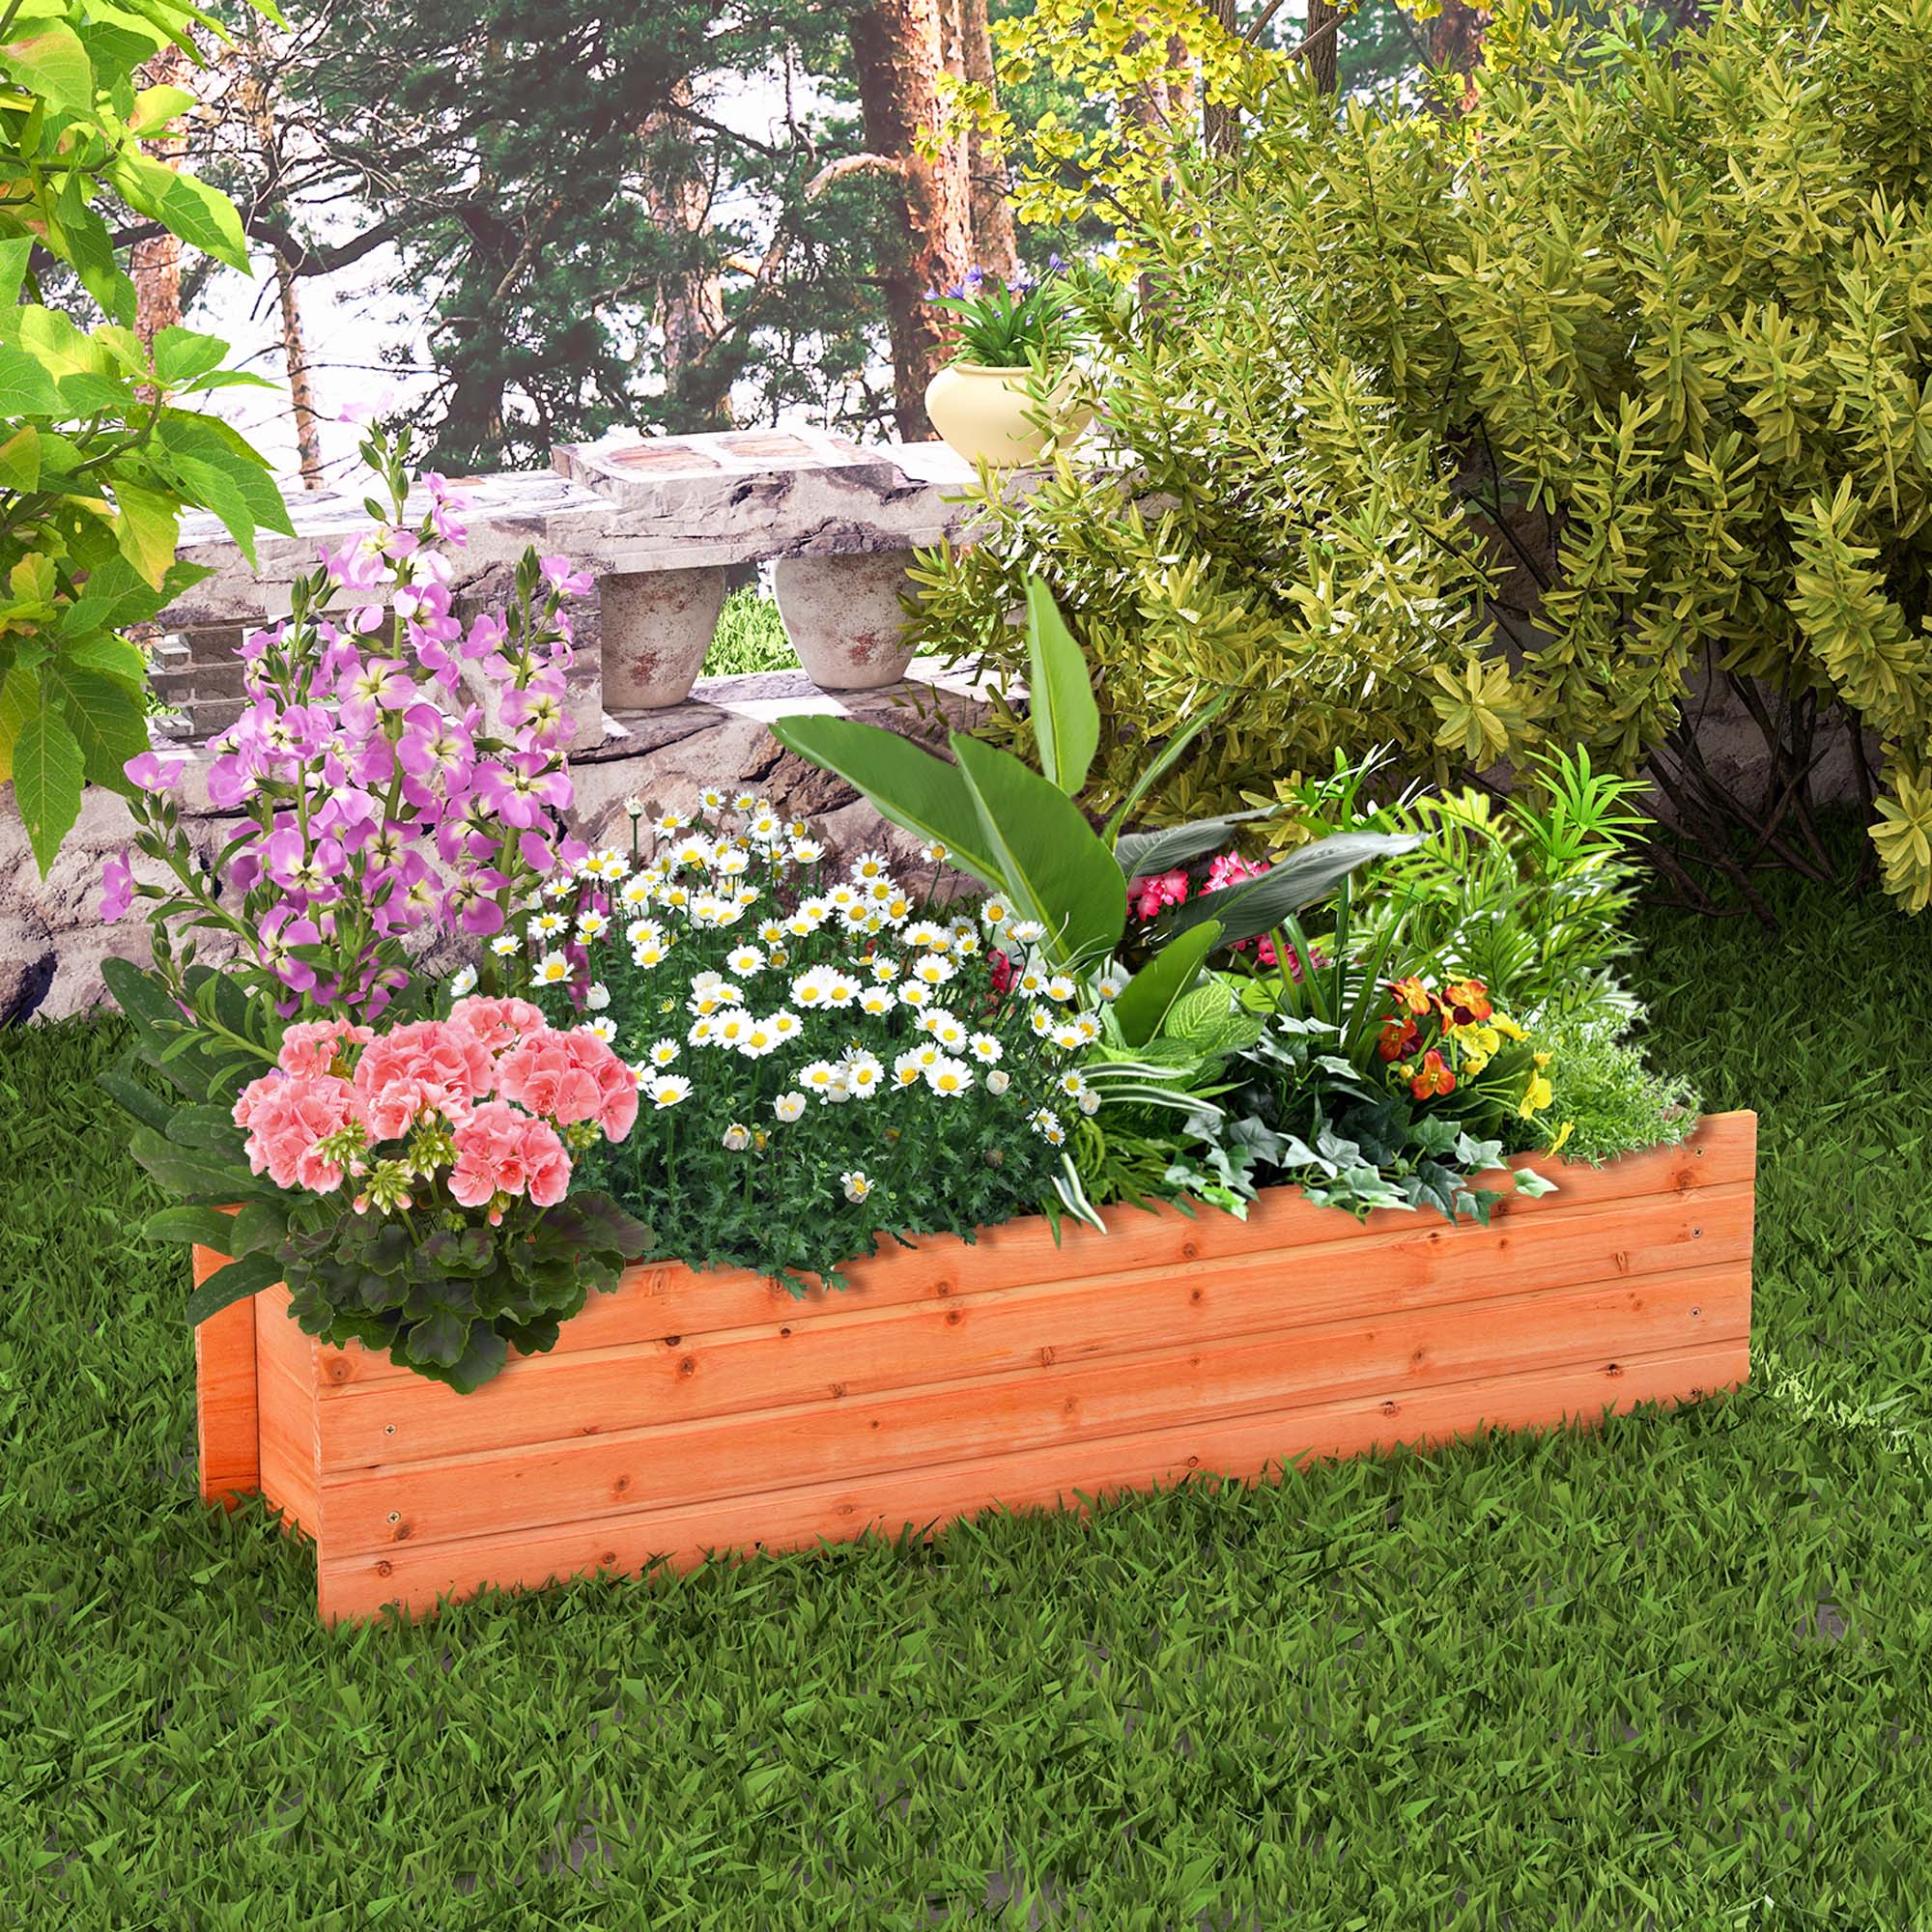 Costway Raised Garden Bed Wood Rectangular Planter Box with 2 Drainage Holes Outdoor - image 4 of 10